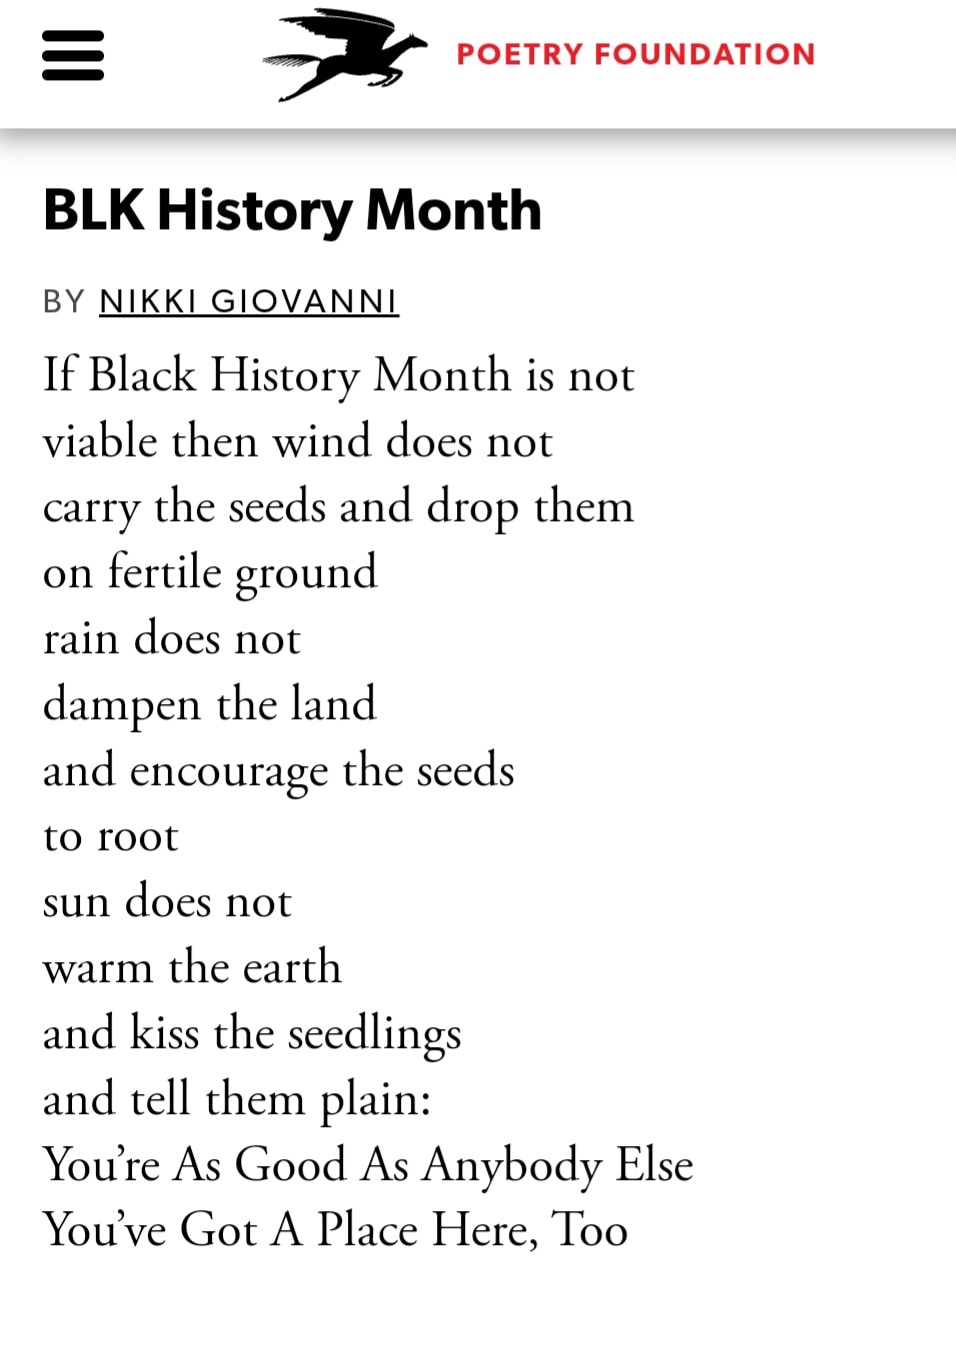 Black History Month Poetry Foundation